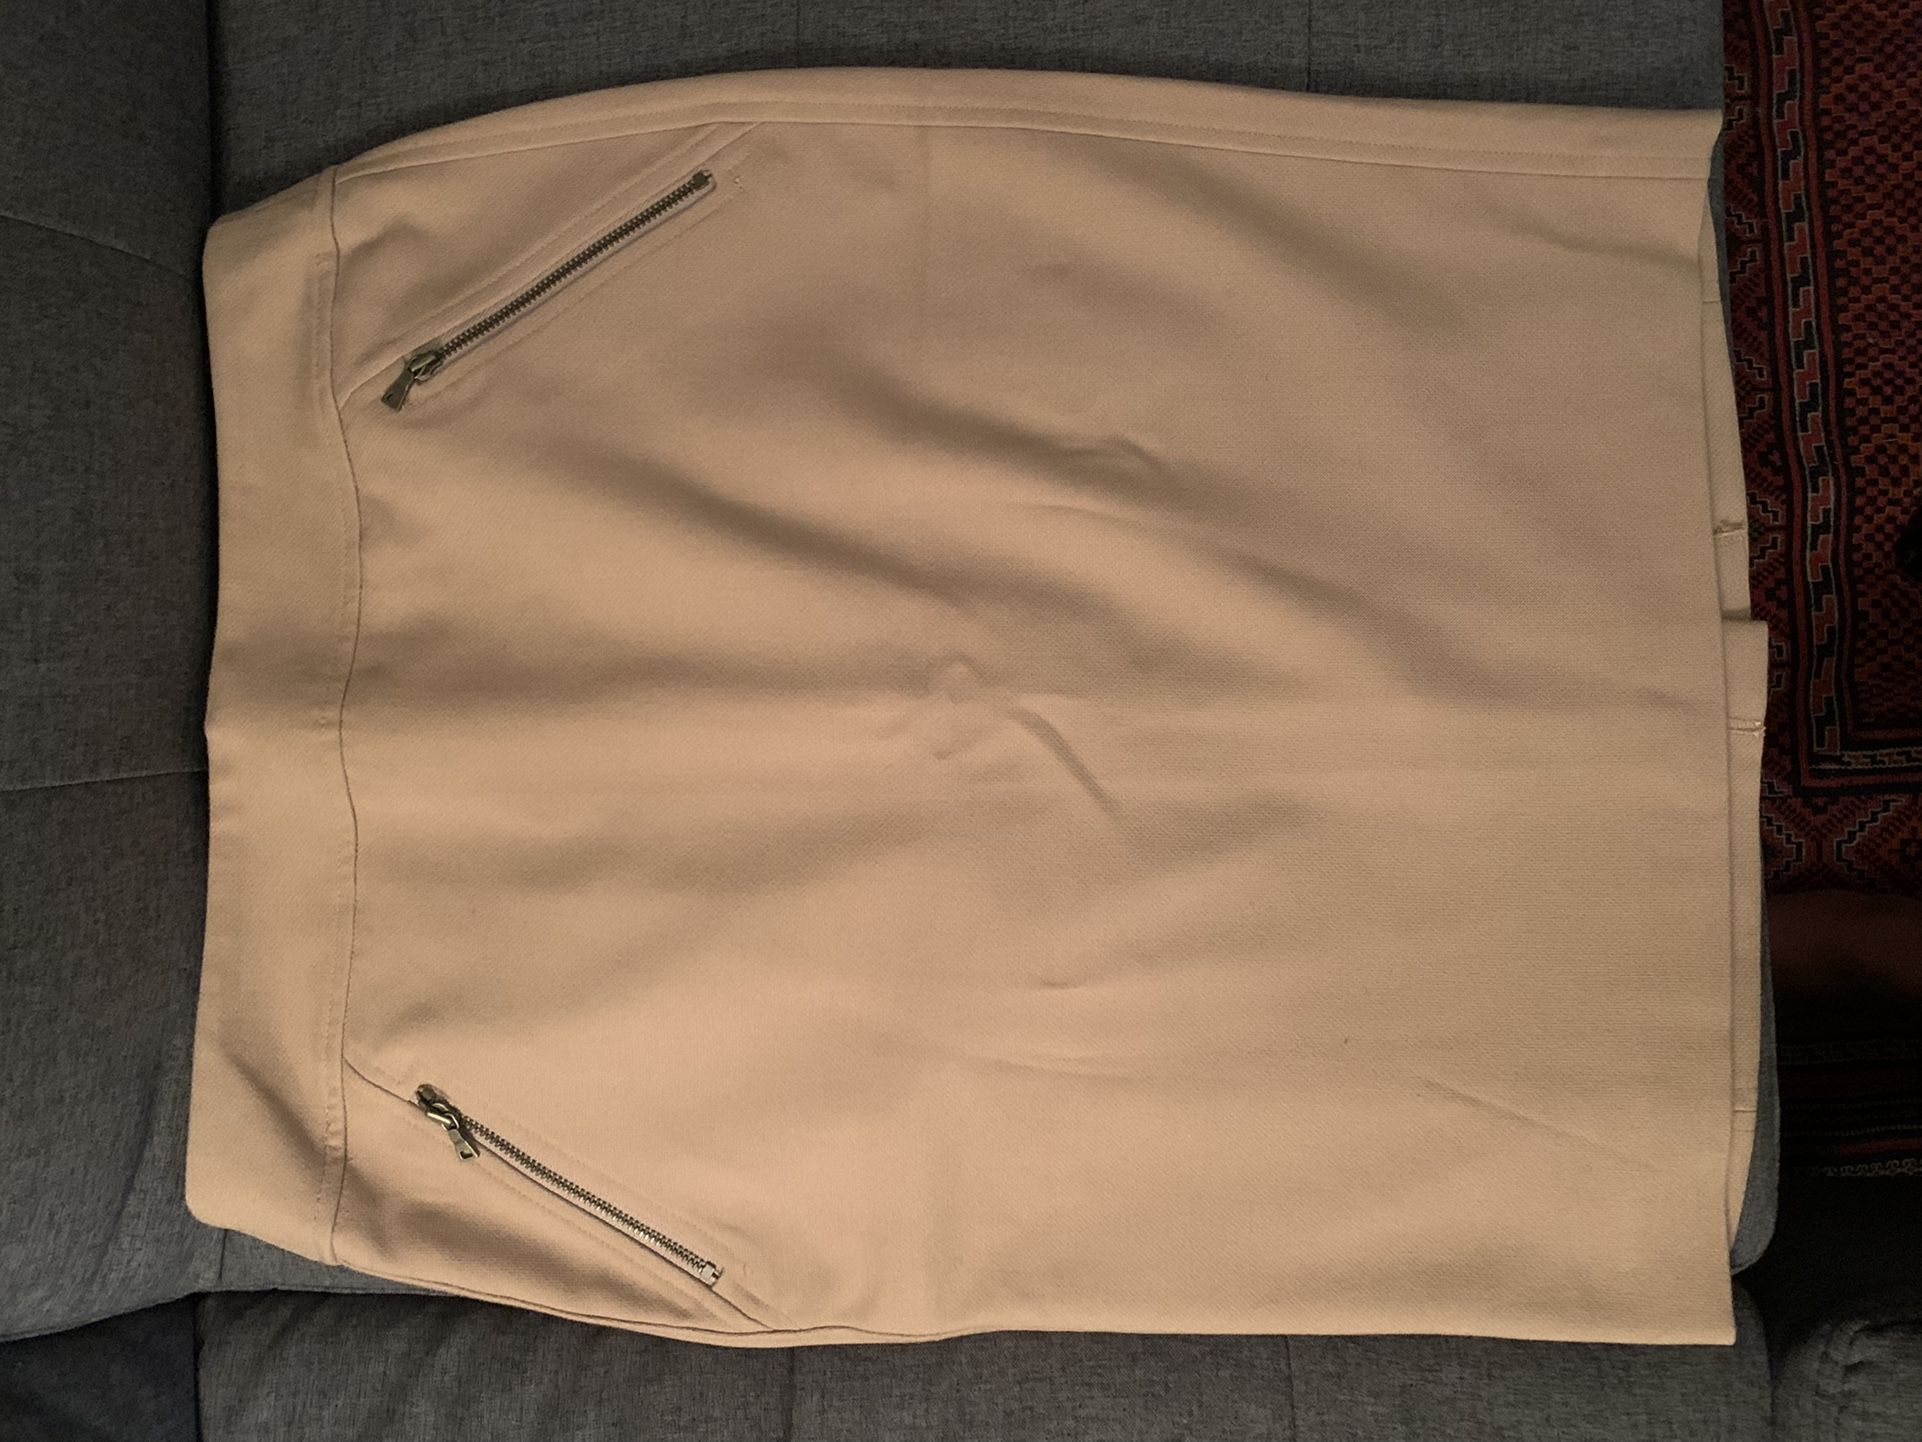 Camel Colored Pencil Skirt (Ann Taylor Lift)